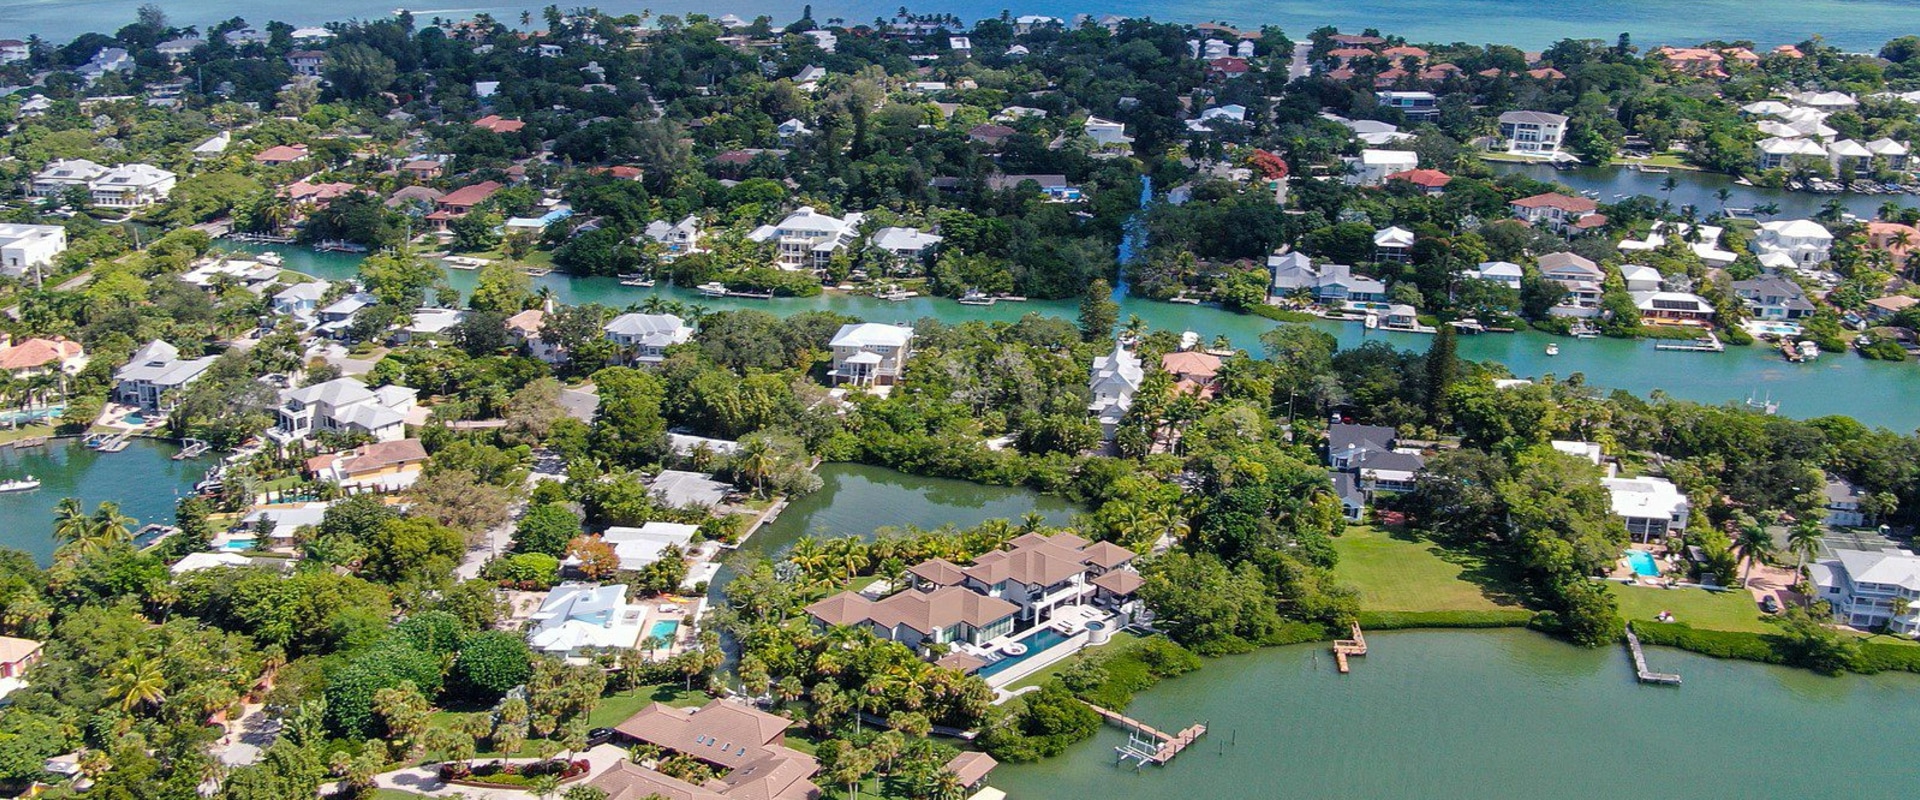 What Will the Real Estate Market Look Like in Florida in 2023?